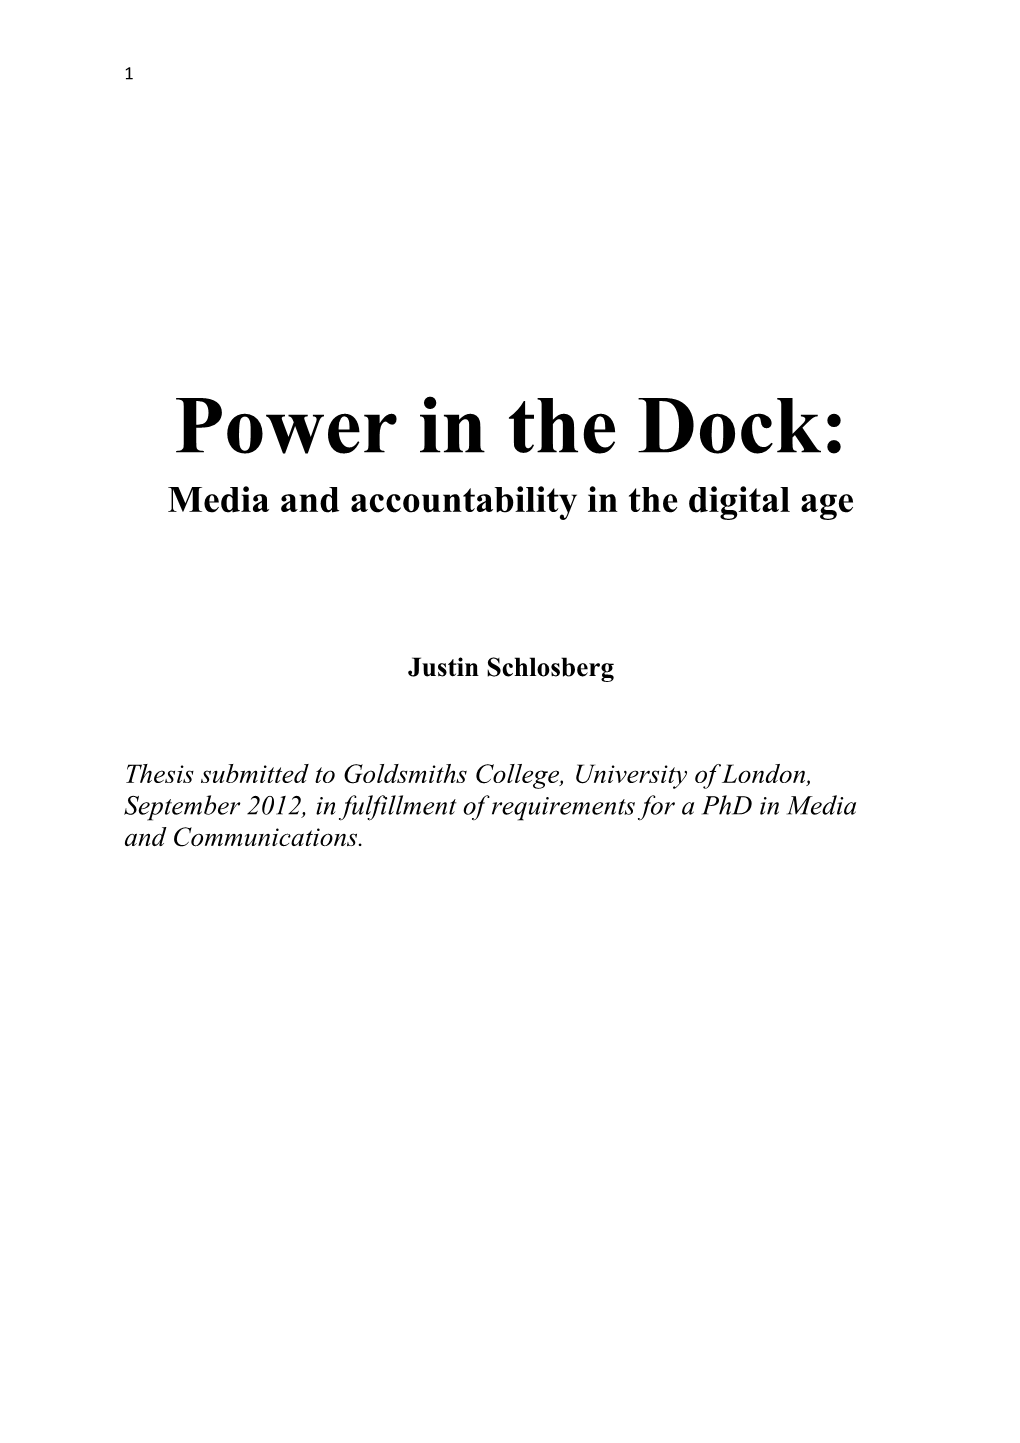 Power in the Dock: Media and Accountability in the Digital Age